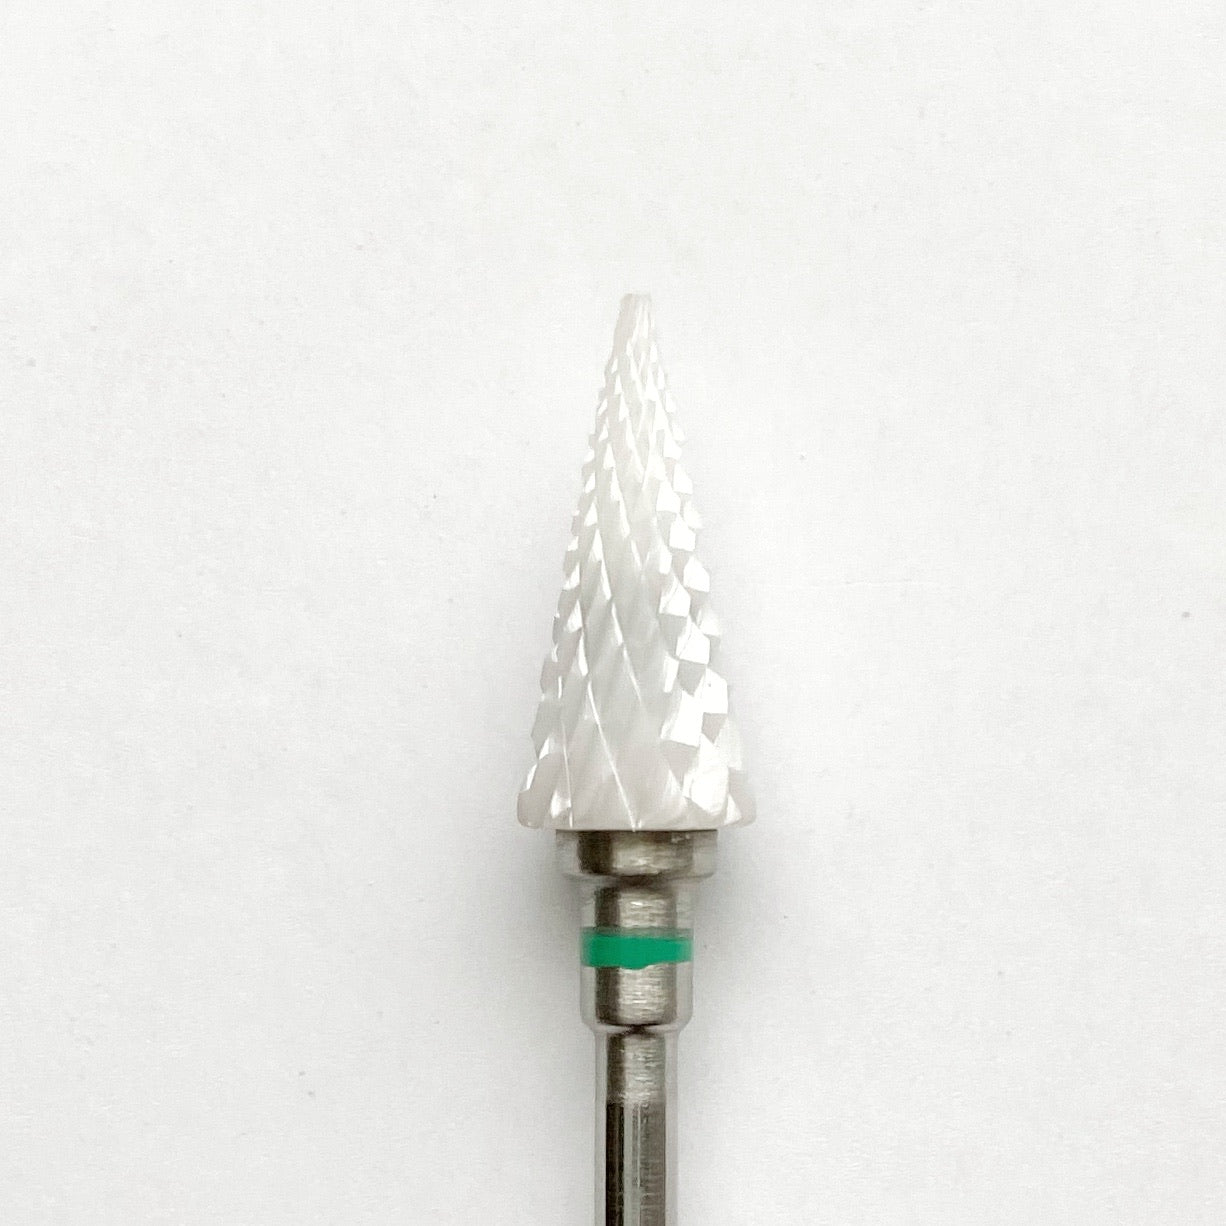 Ceramic Bit for Removal (Cone, Green) right-handed